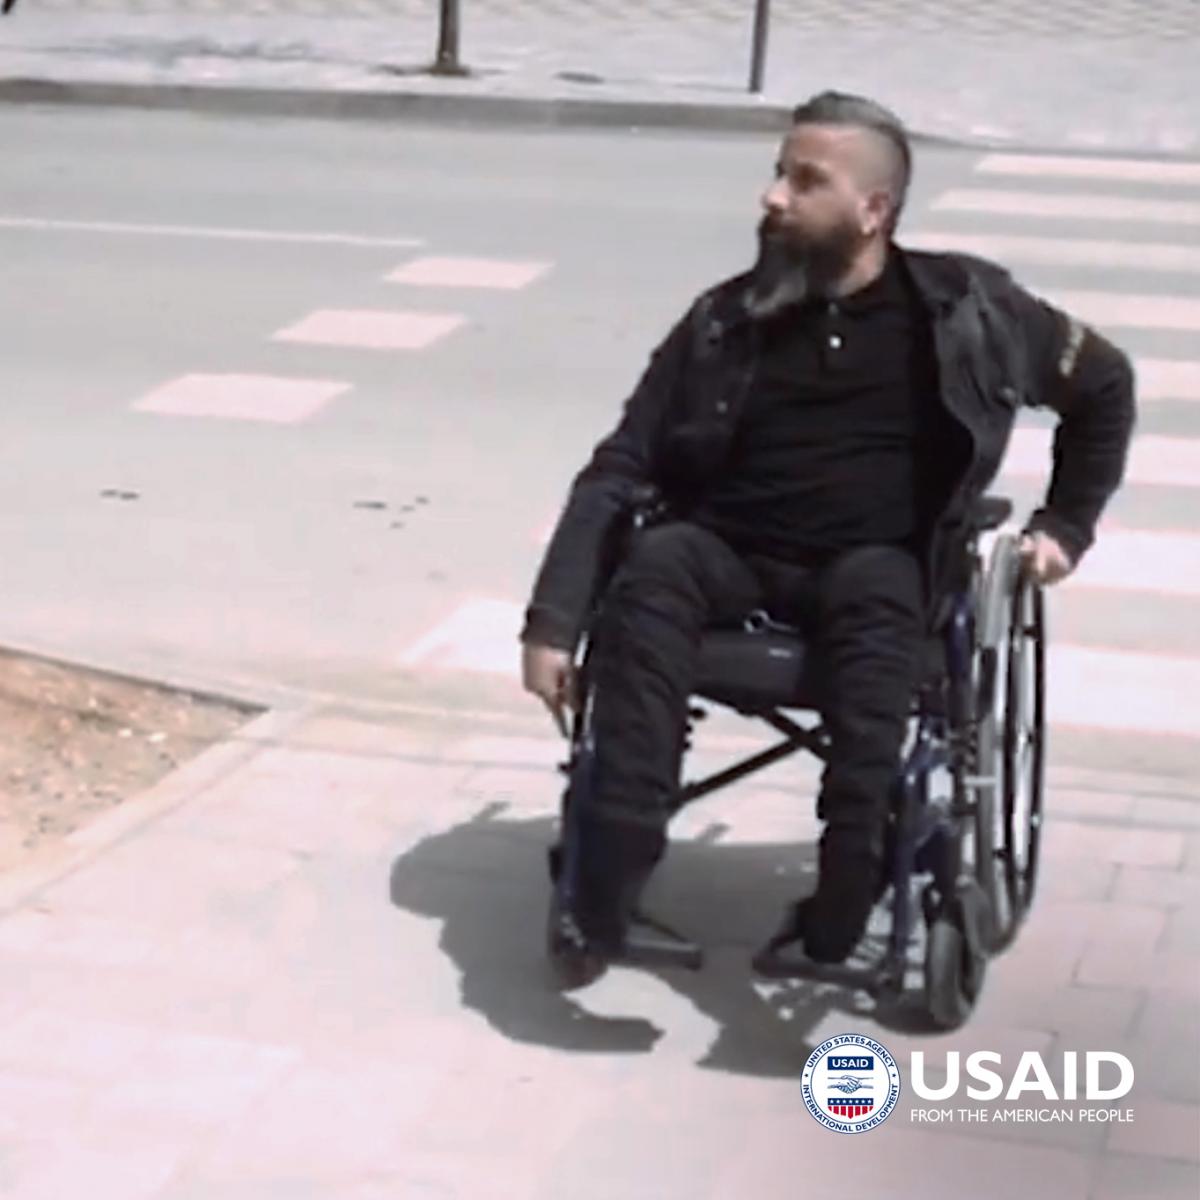 Easier parking facilitates employment for people with disabilities